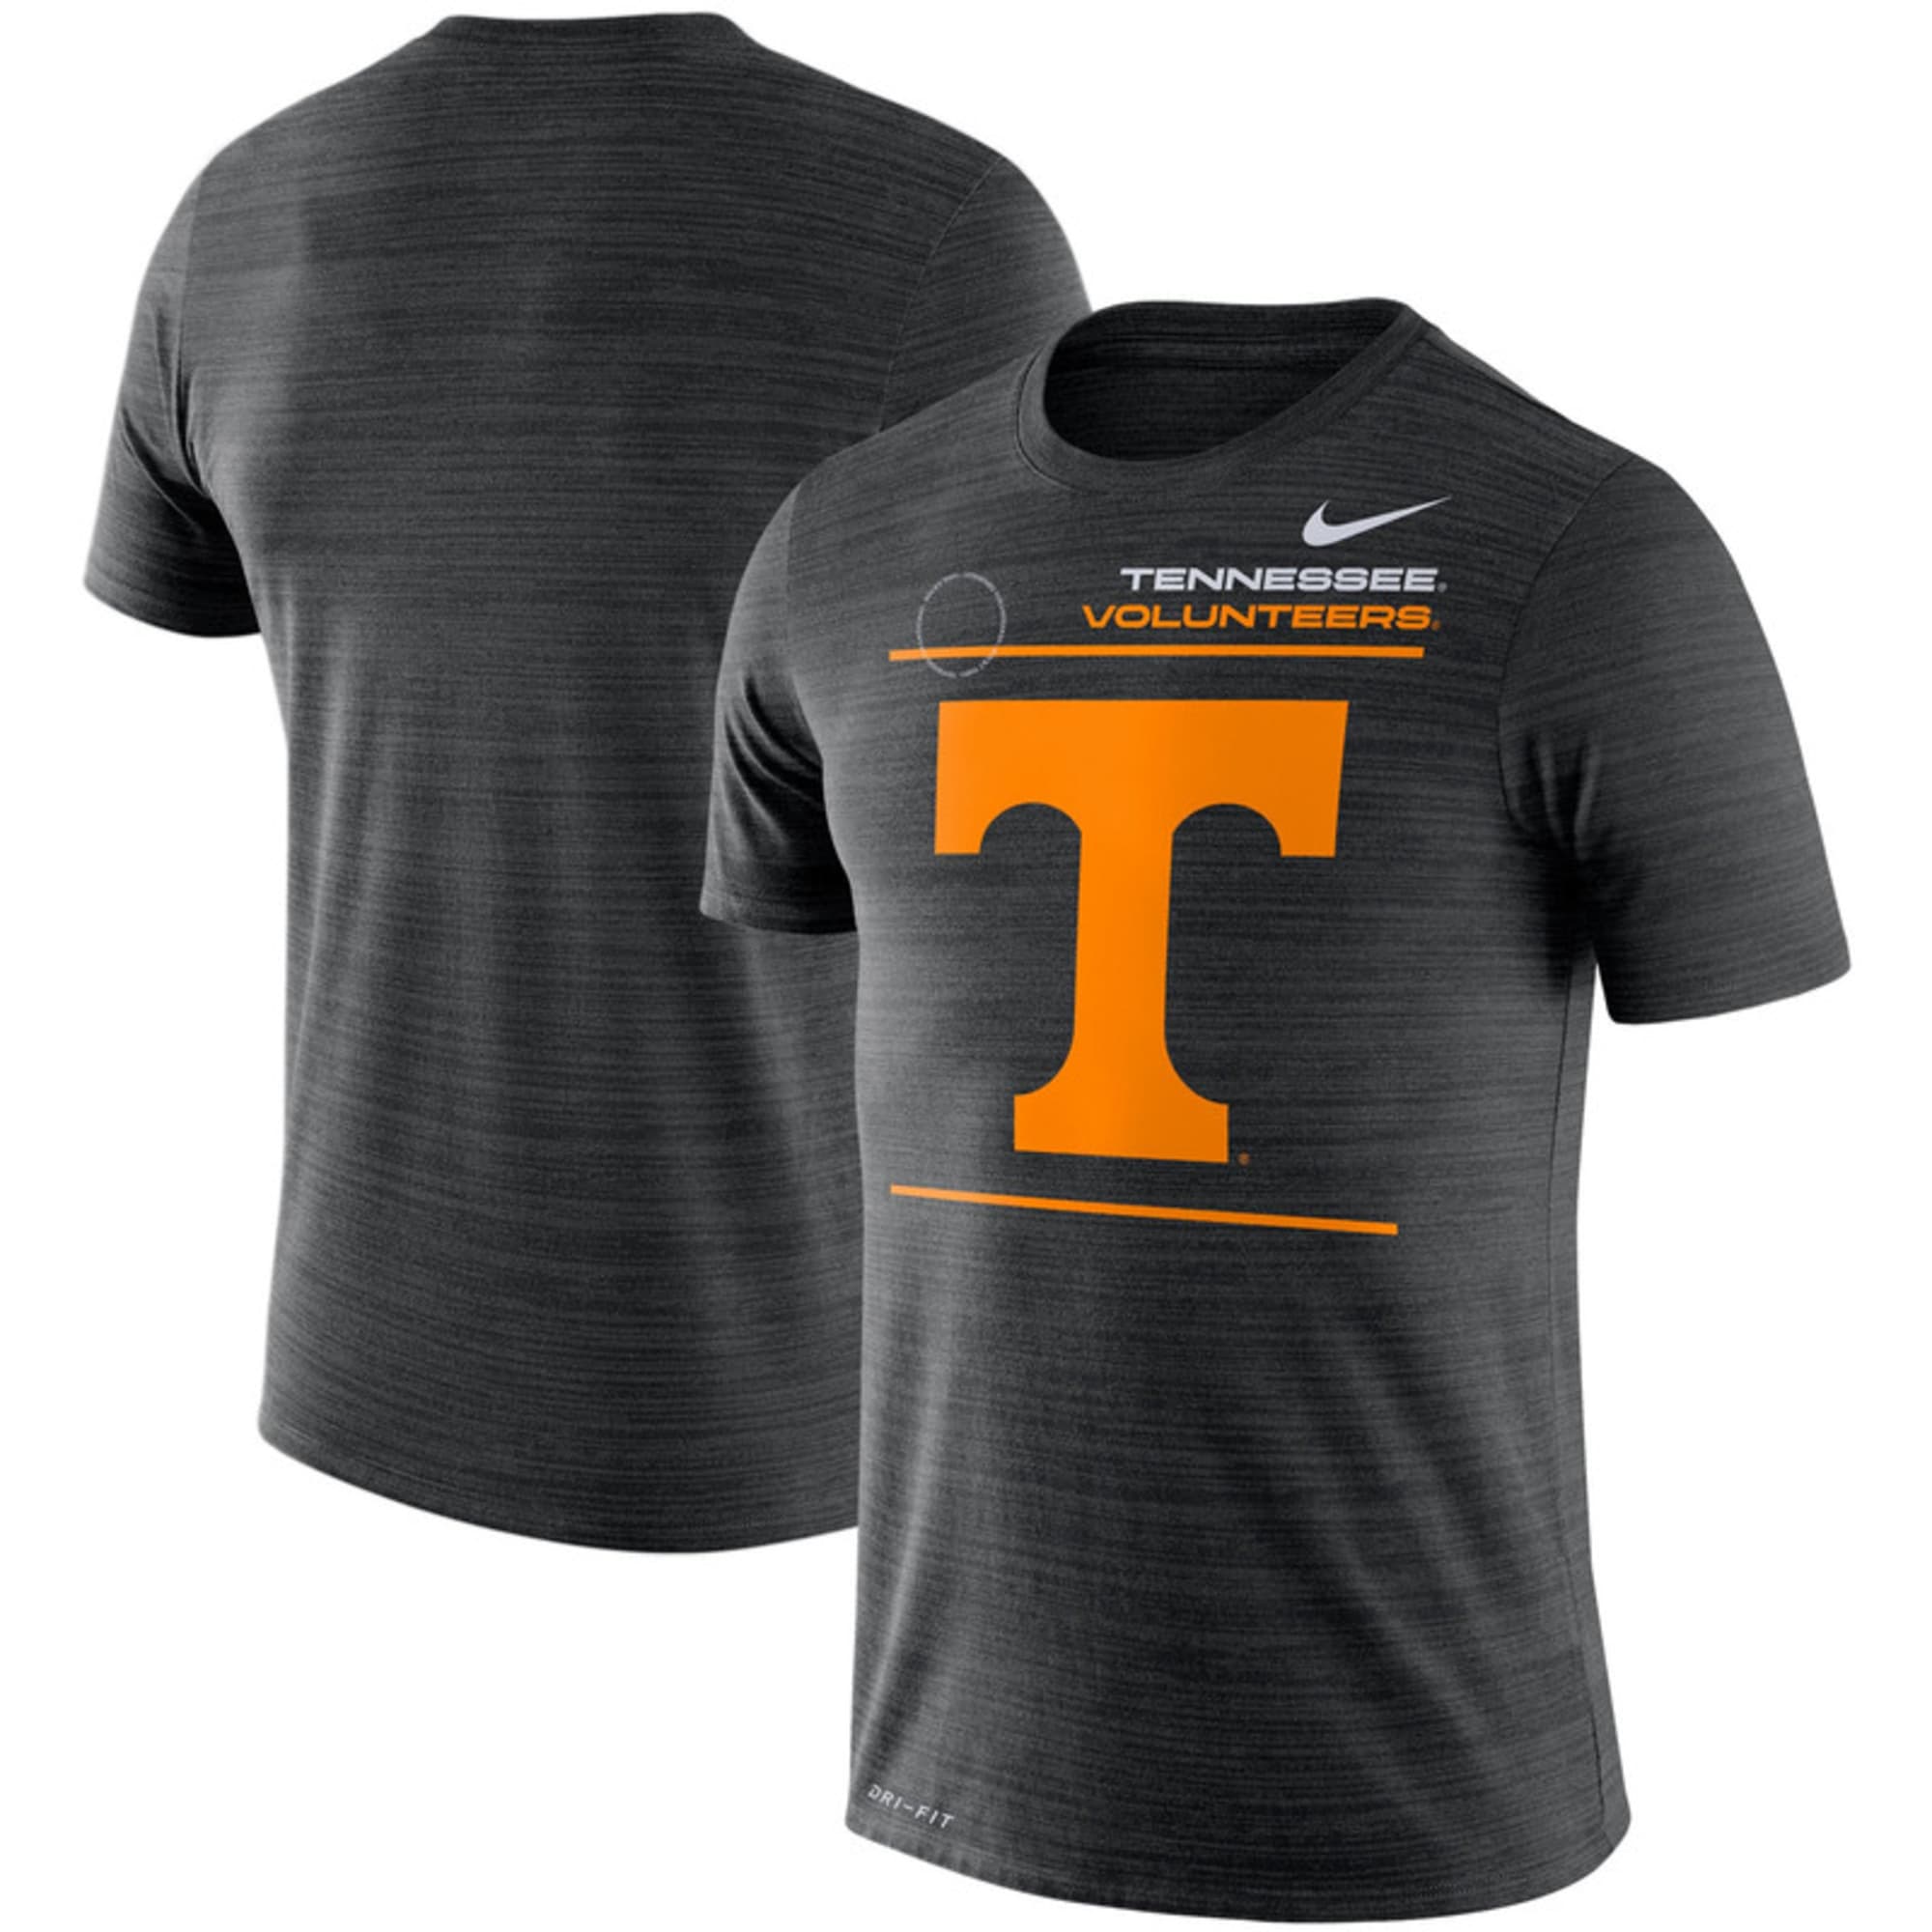 Tennessee Volunteers Colosseum Youth Buddy Baseball T-Shirt - White